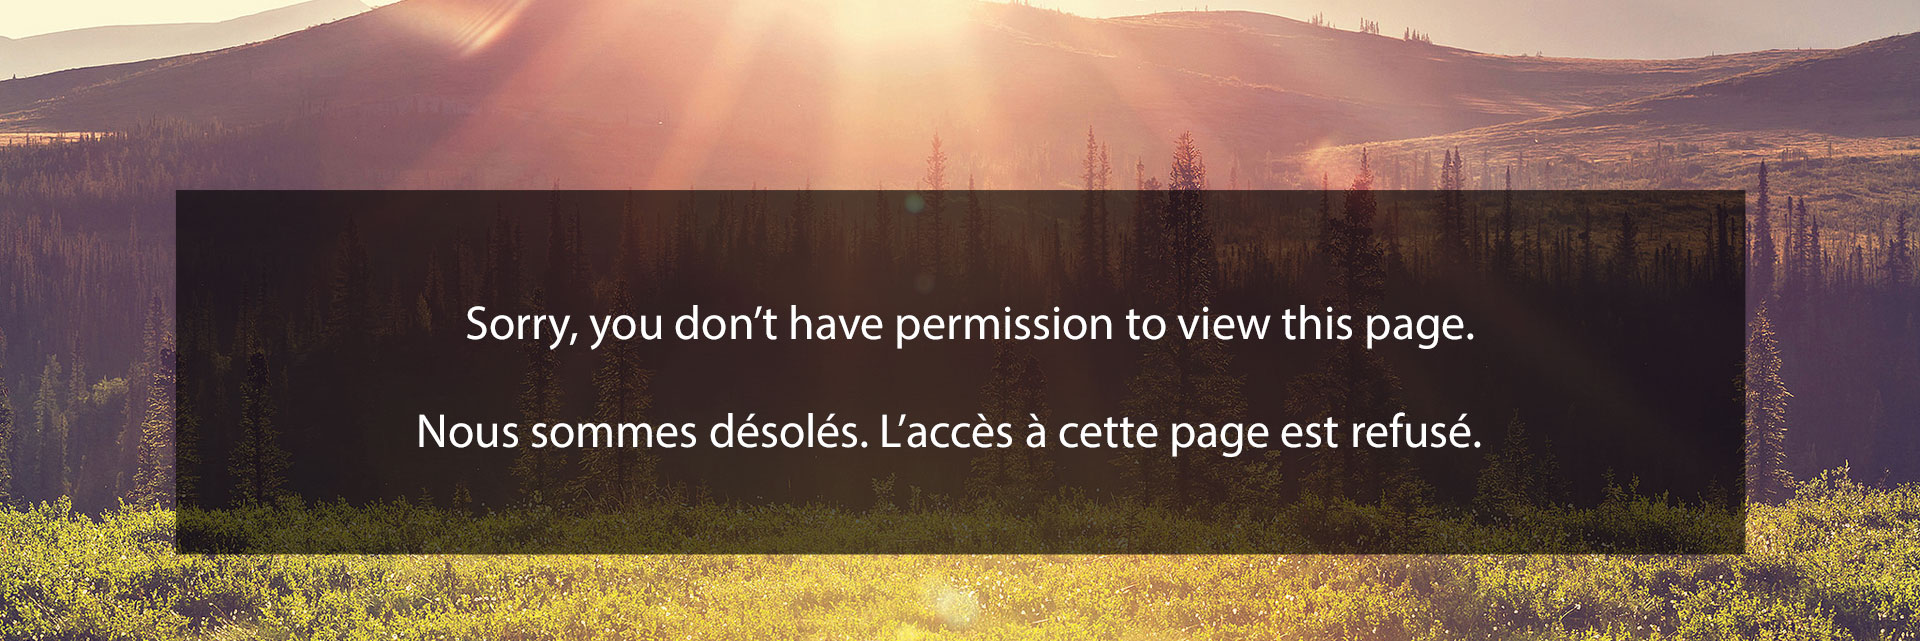 Sorry, you don’t have permission to view this page.